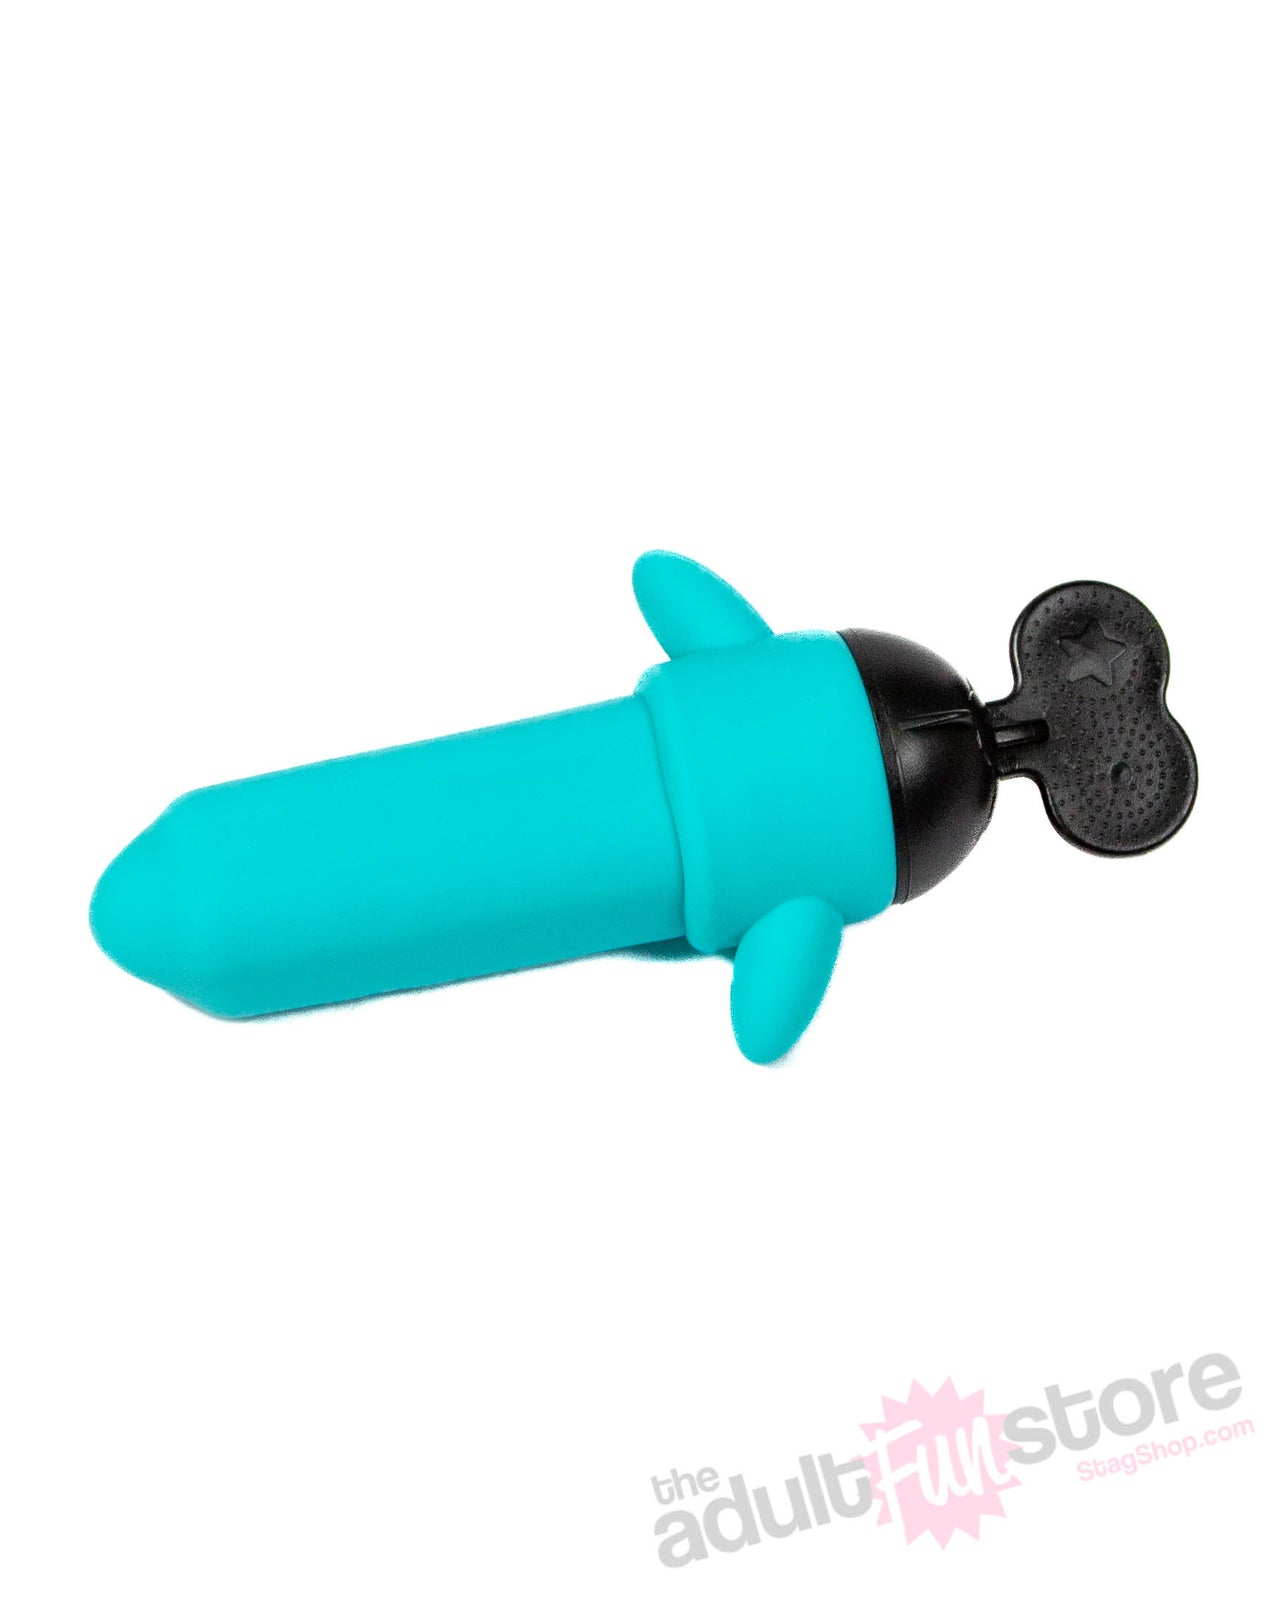 Odile - Absolute Twist Anal Dilator - Turquoise - Stag Shop